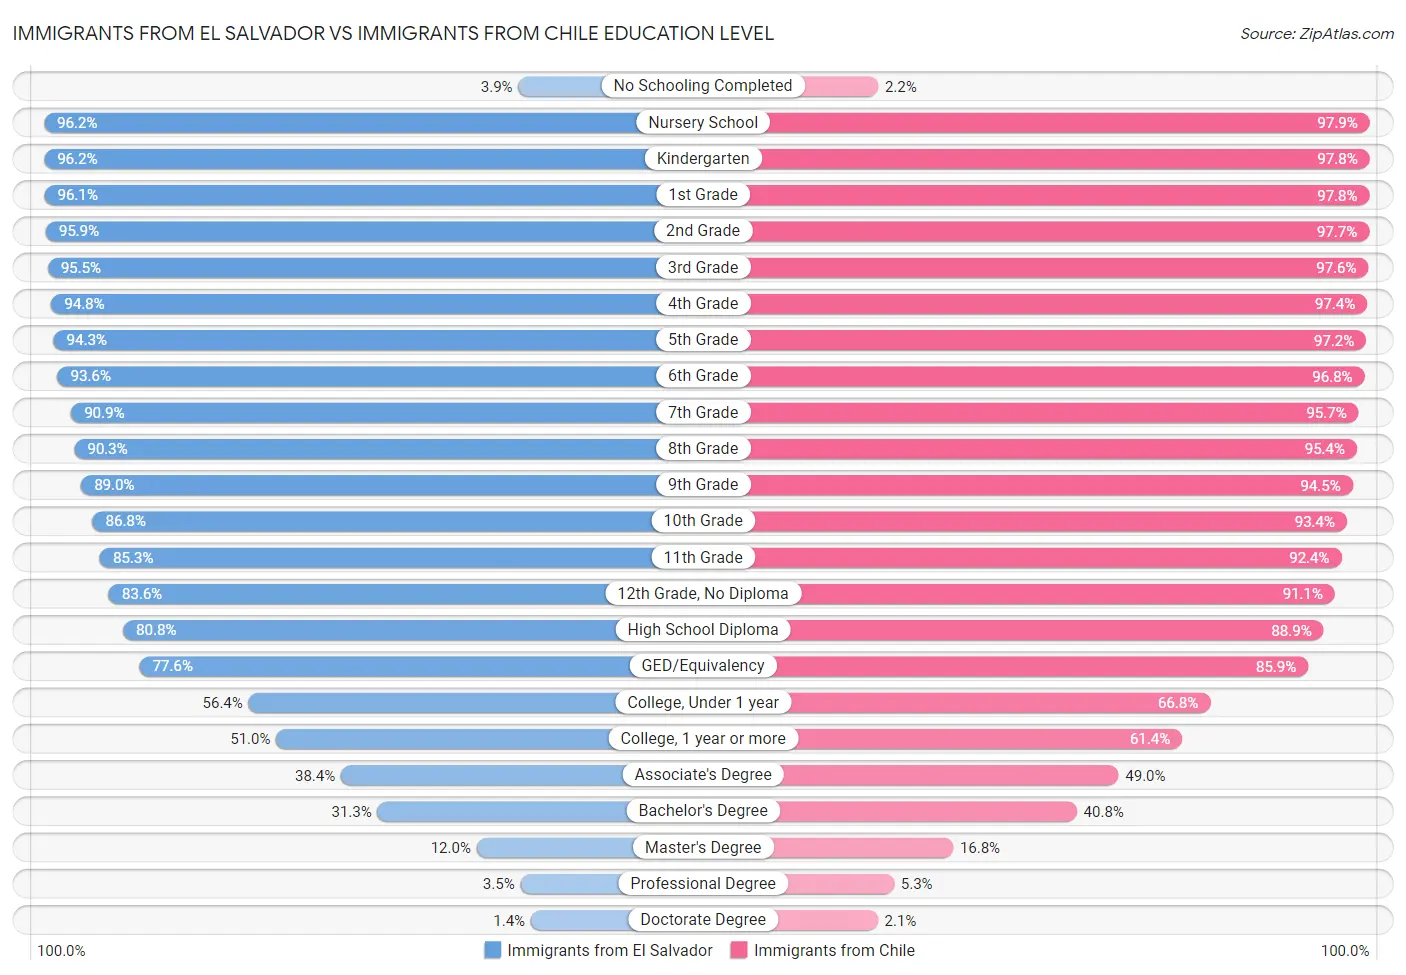 Immigrants from El Salvador vs Immigrants from Chile Education Level